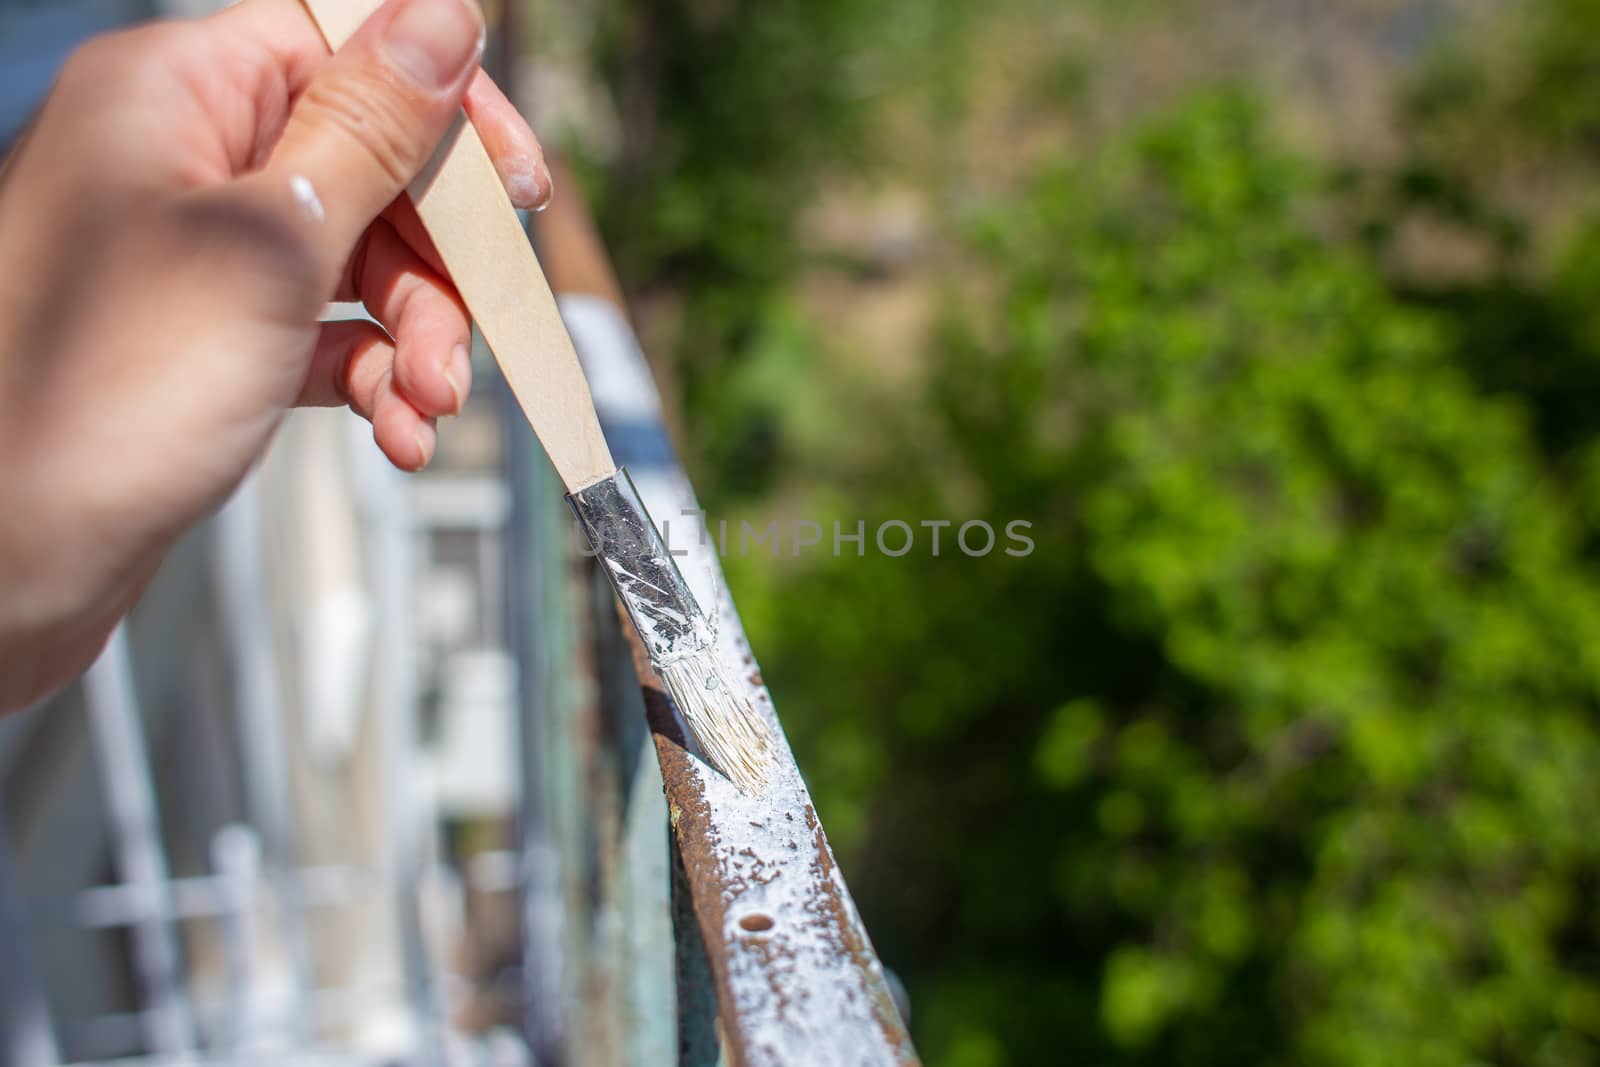 The process of painting rusty peeling rods on the fence. Man paints a brush with a fence, hand closeup. Spring work or repair